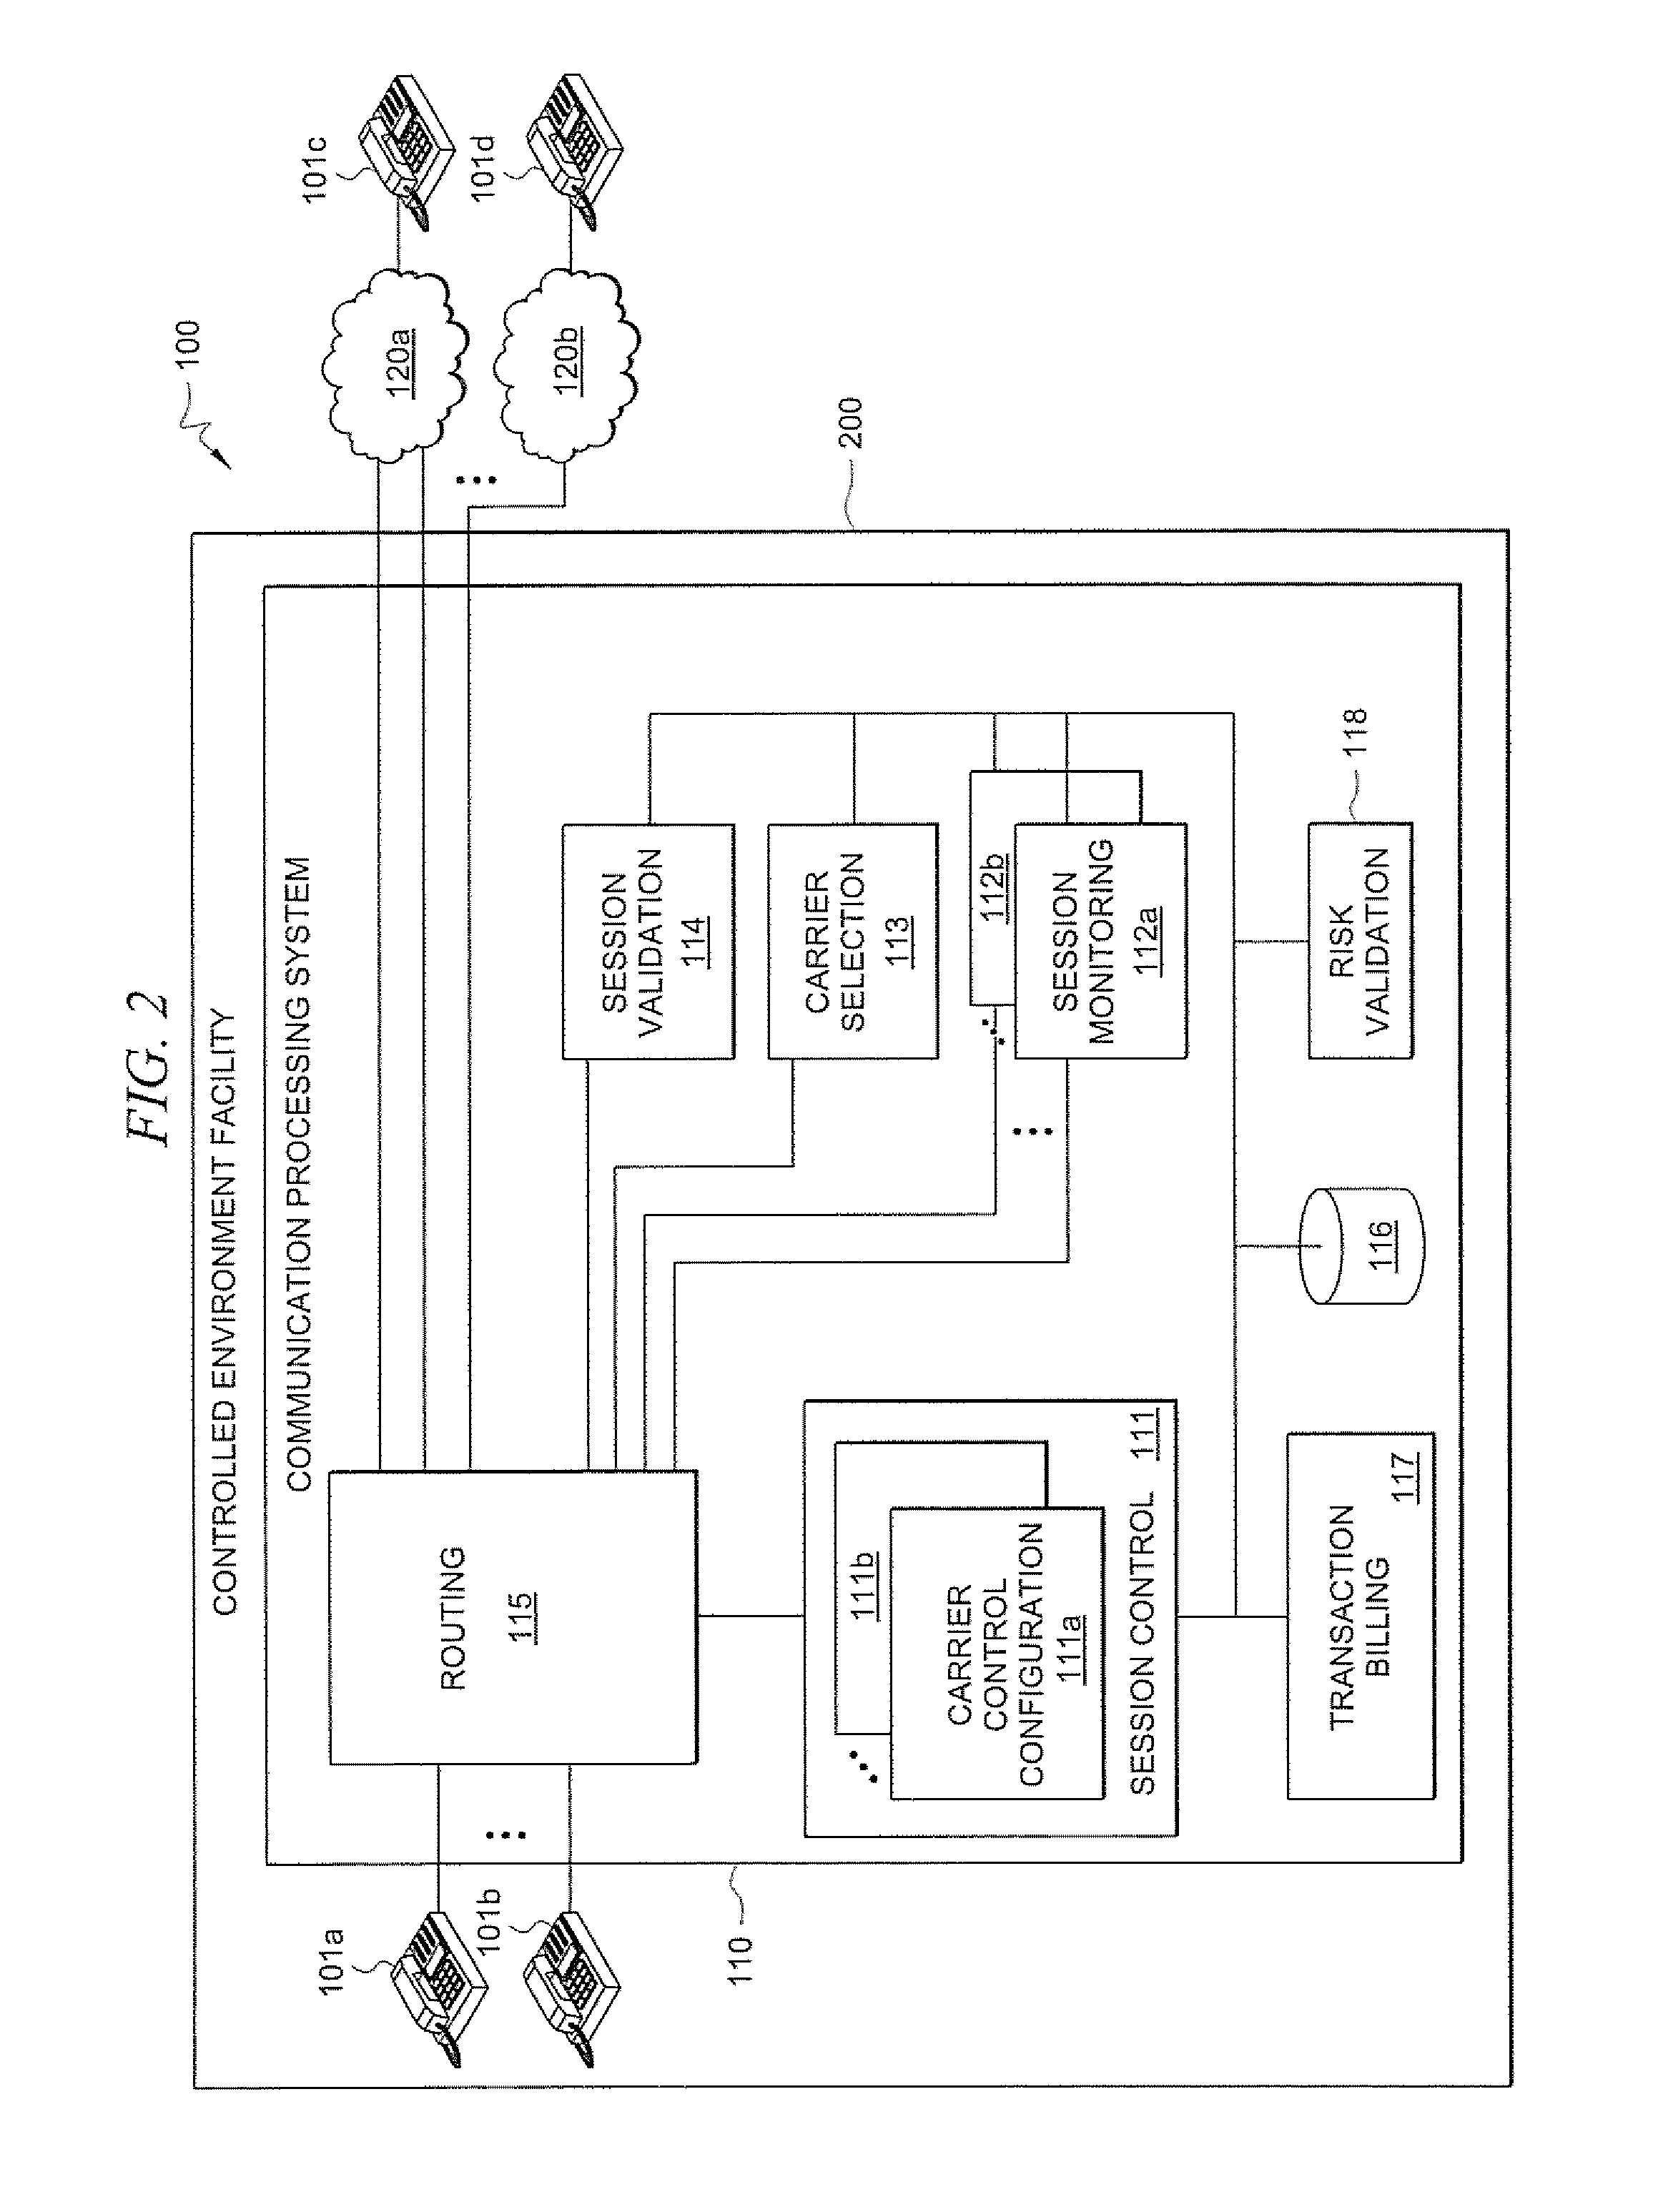 Selection of a particular communication carrier from a plurality of communication carriers in a secure environment